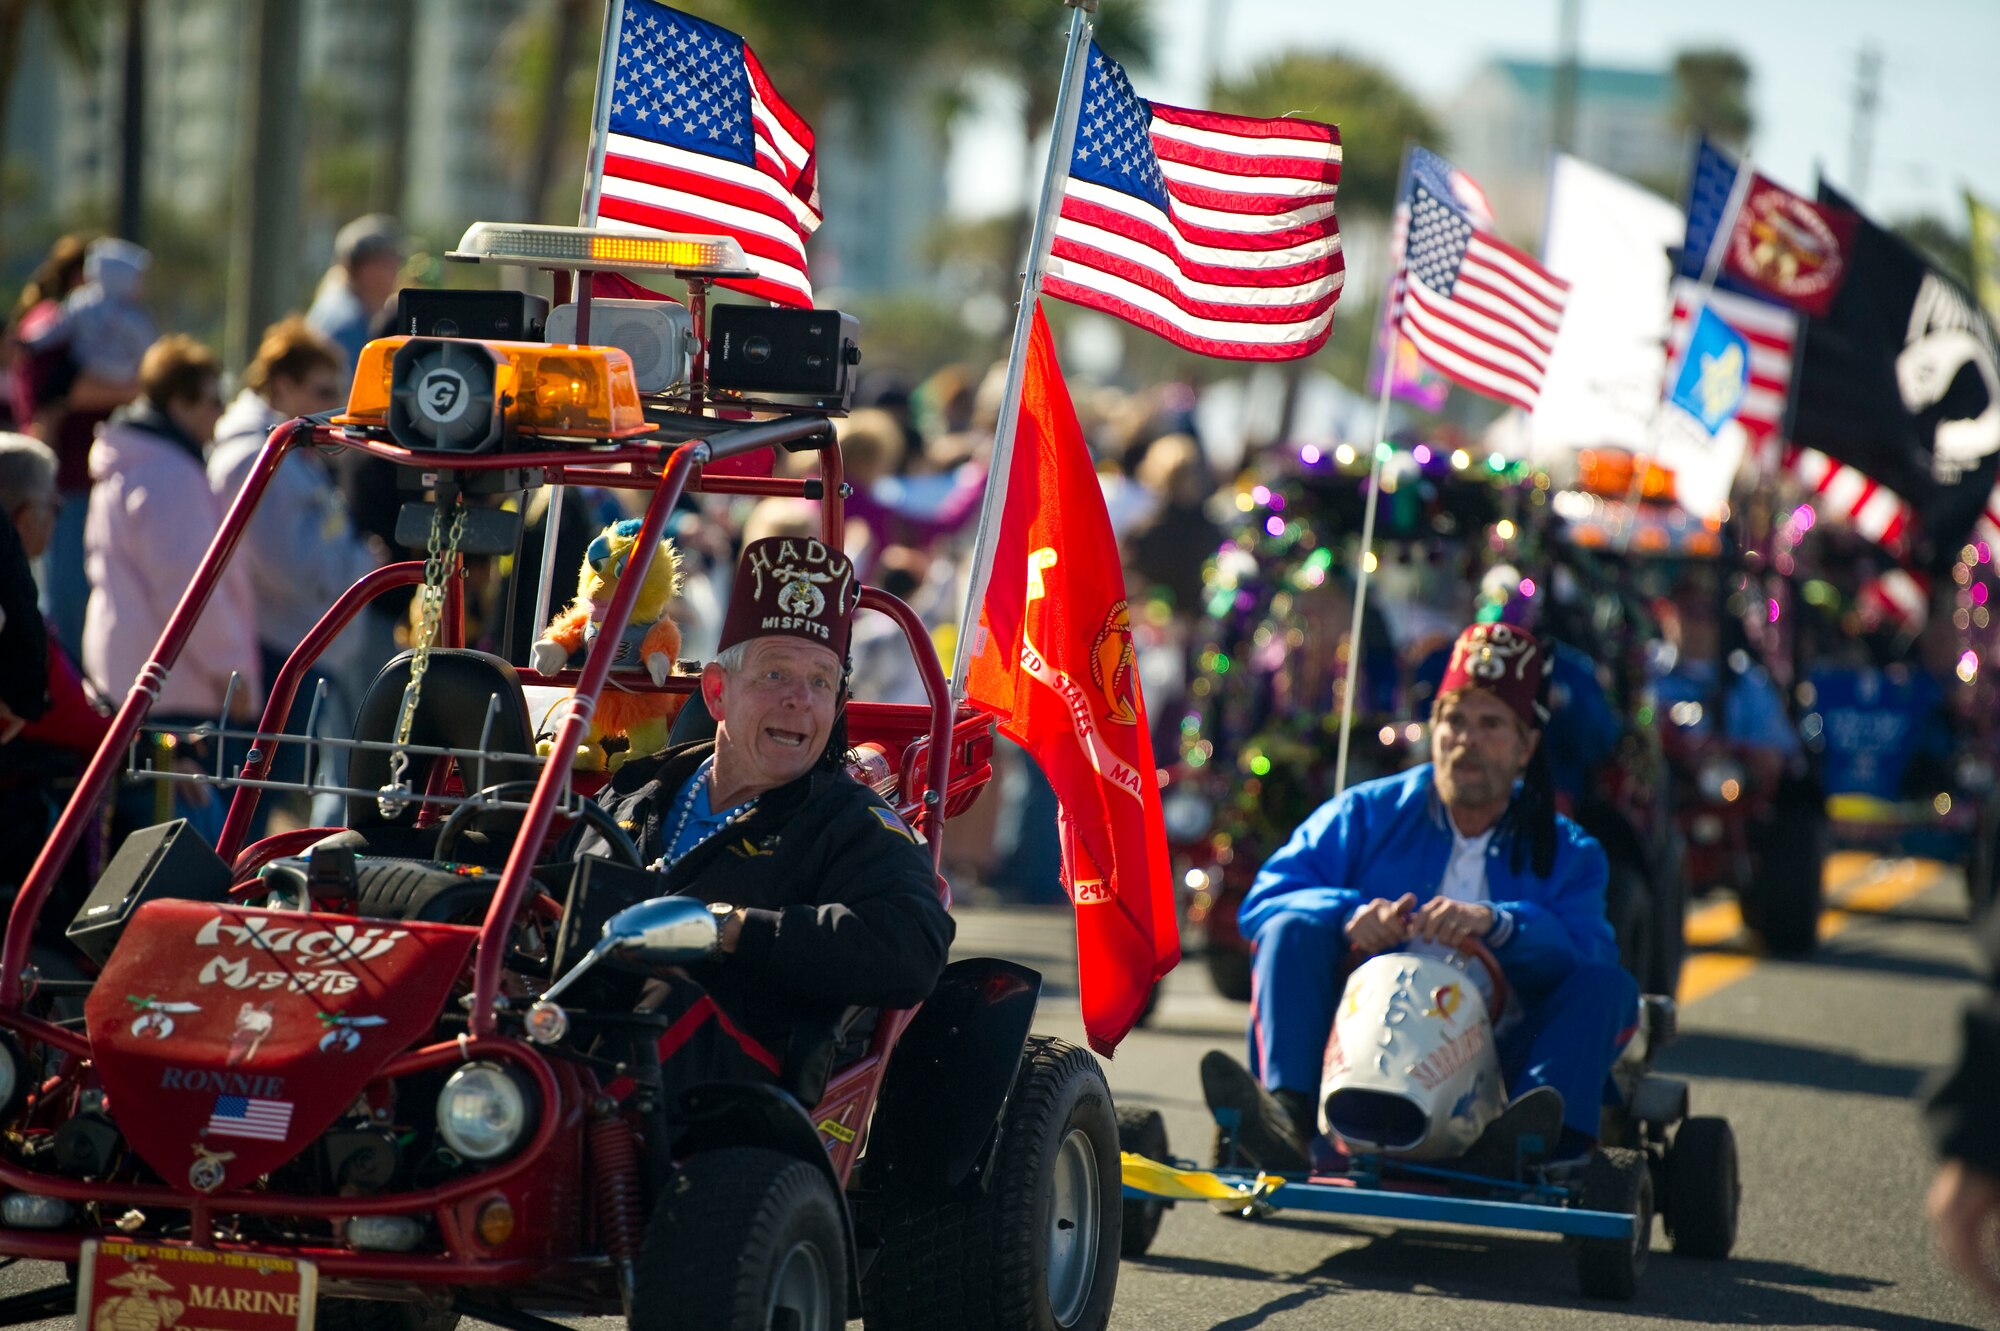 Member of the Hadji Misfits, a local group of the Shriners, ride carts bearing flags along a parade route during a mardi gras parade at Navarre Beach, Fla., Feb. 2, 2013. Several entries competed for winning best entry in the parade. (U.S. Air Force photo / Tech. Sgt. Vanessa Valentine)